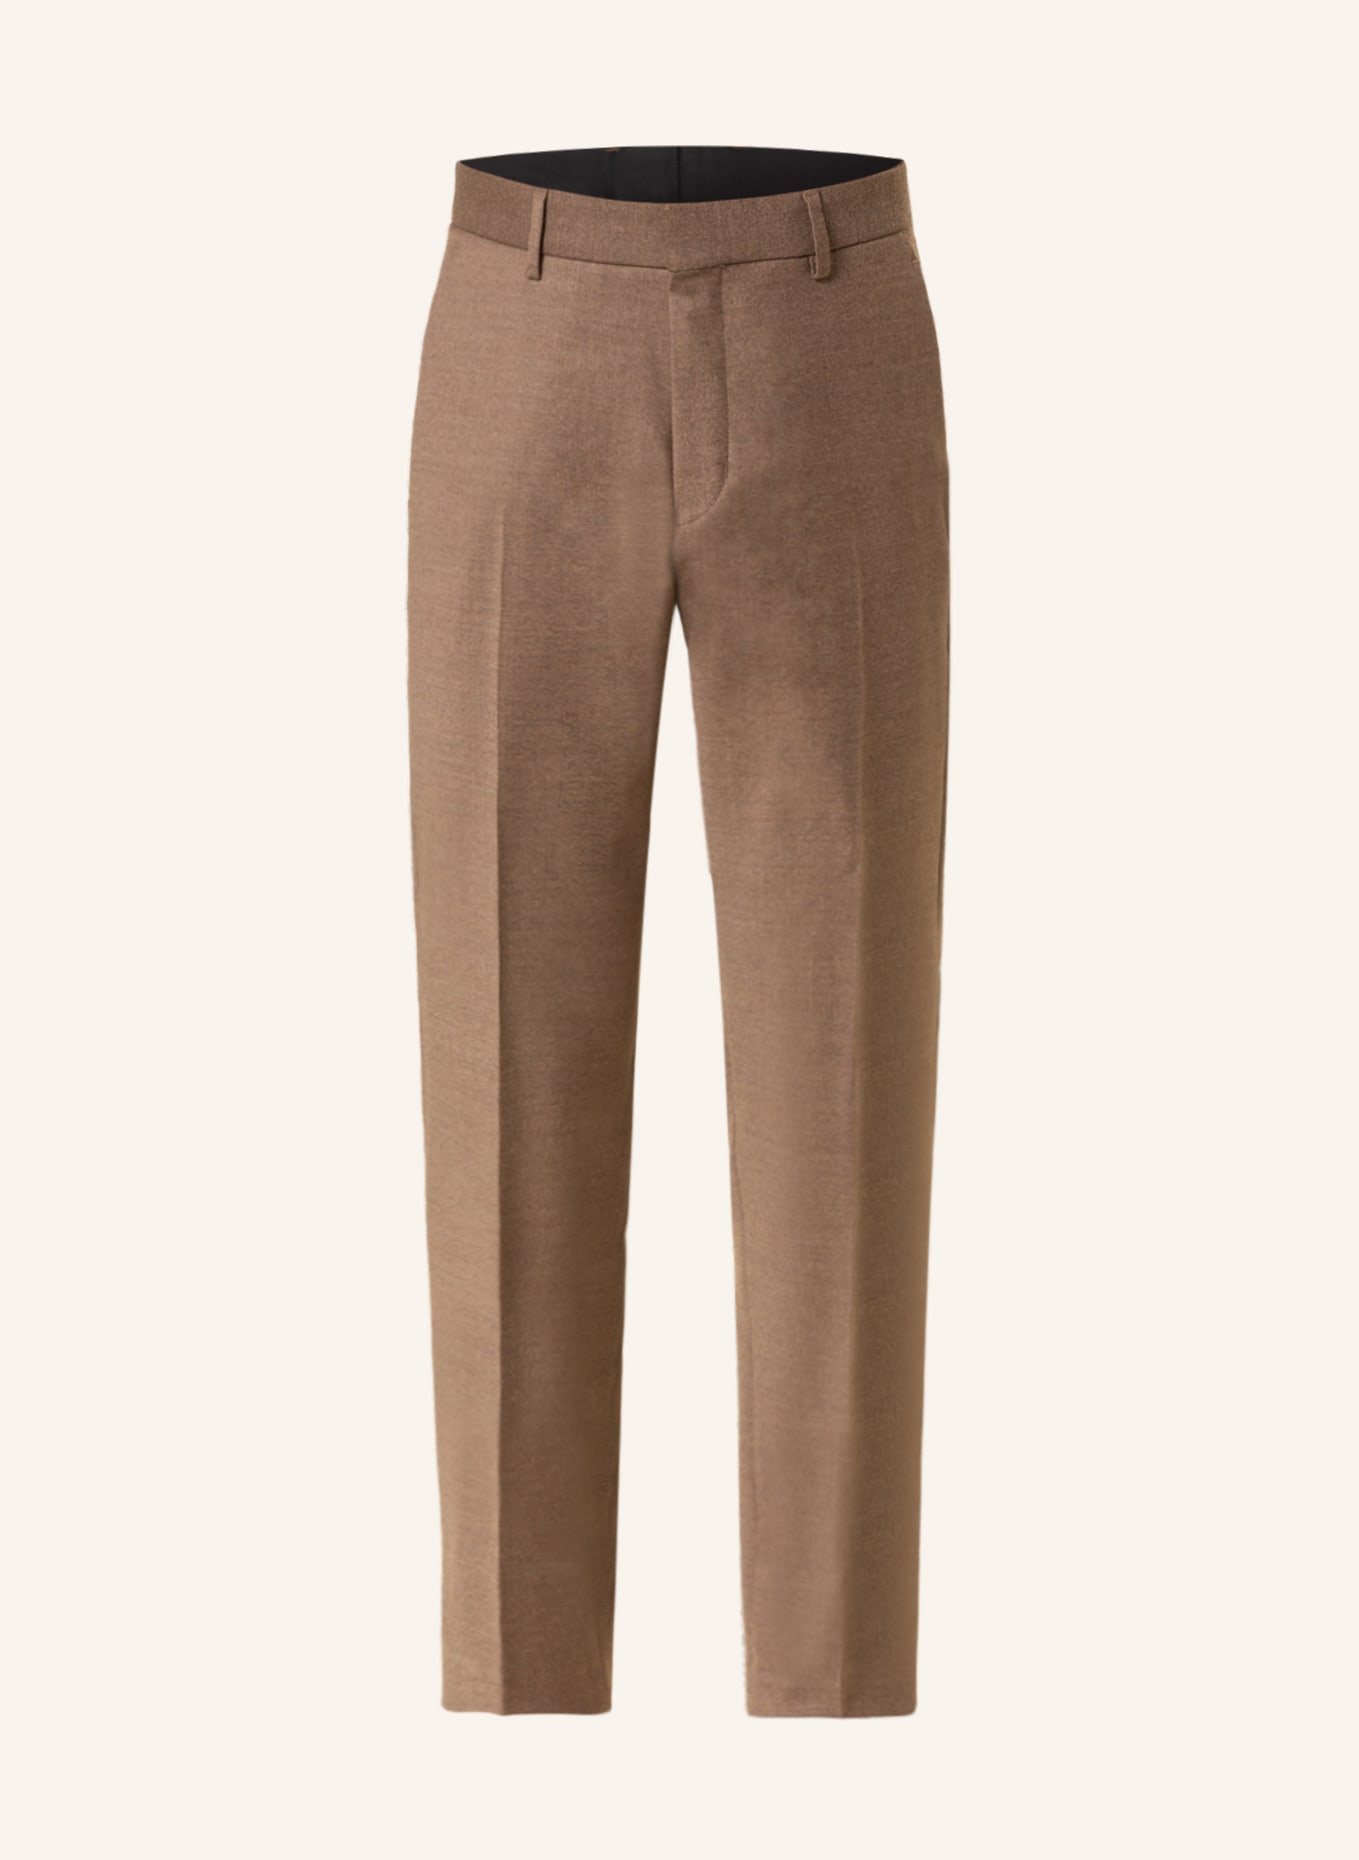 Tiger of Sweden Sosa Cotton Trousers Dusty Green at CareOfCarlcom